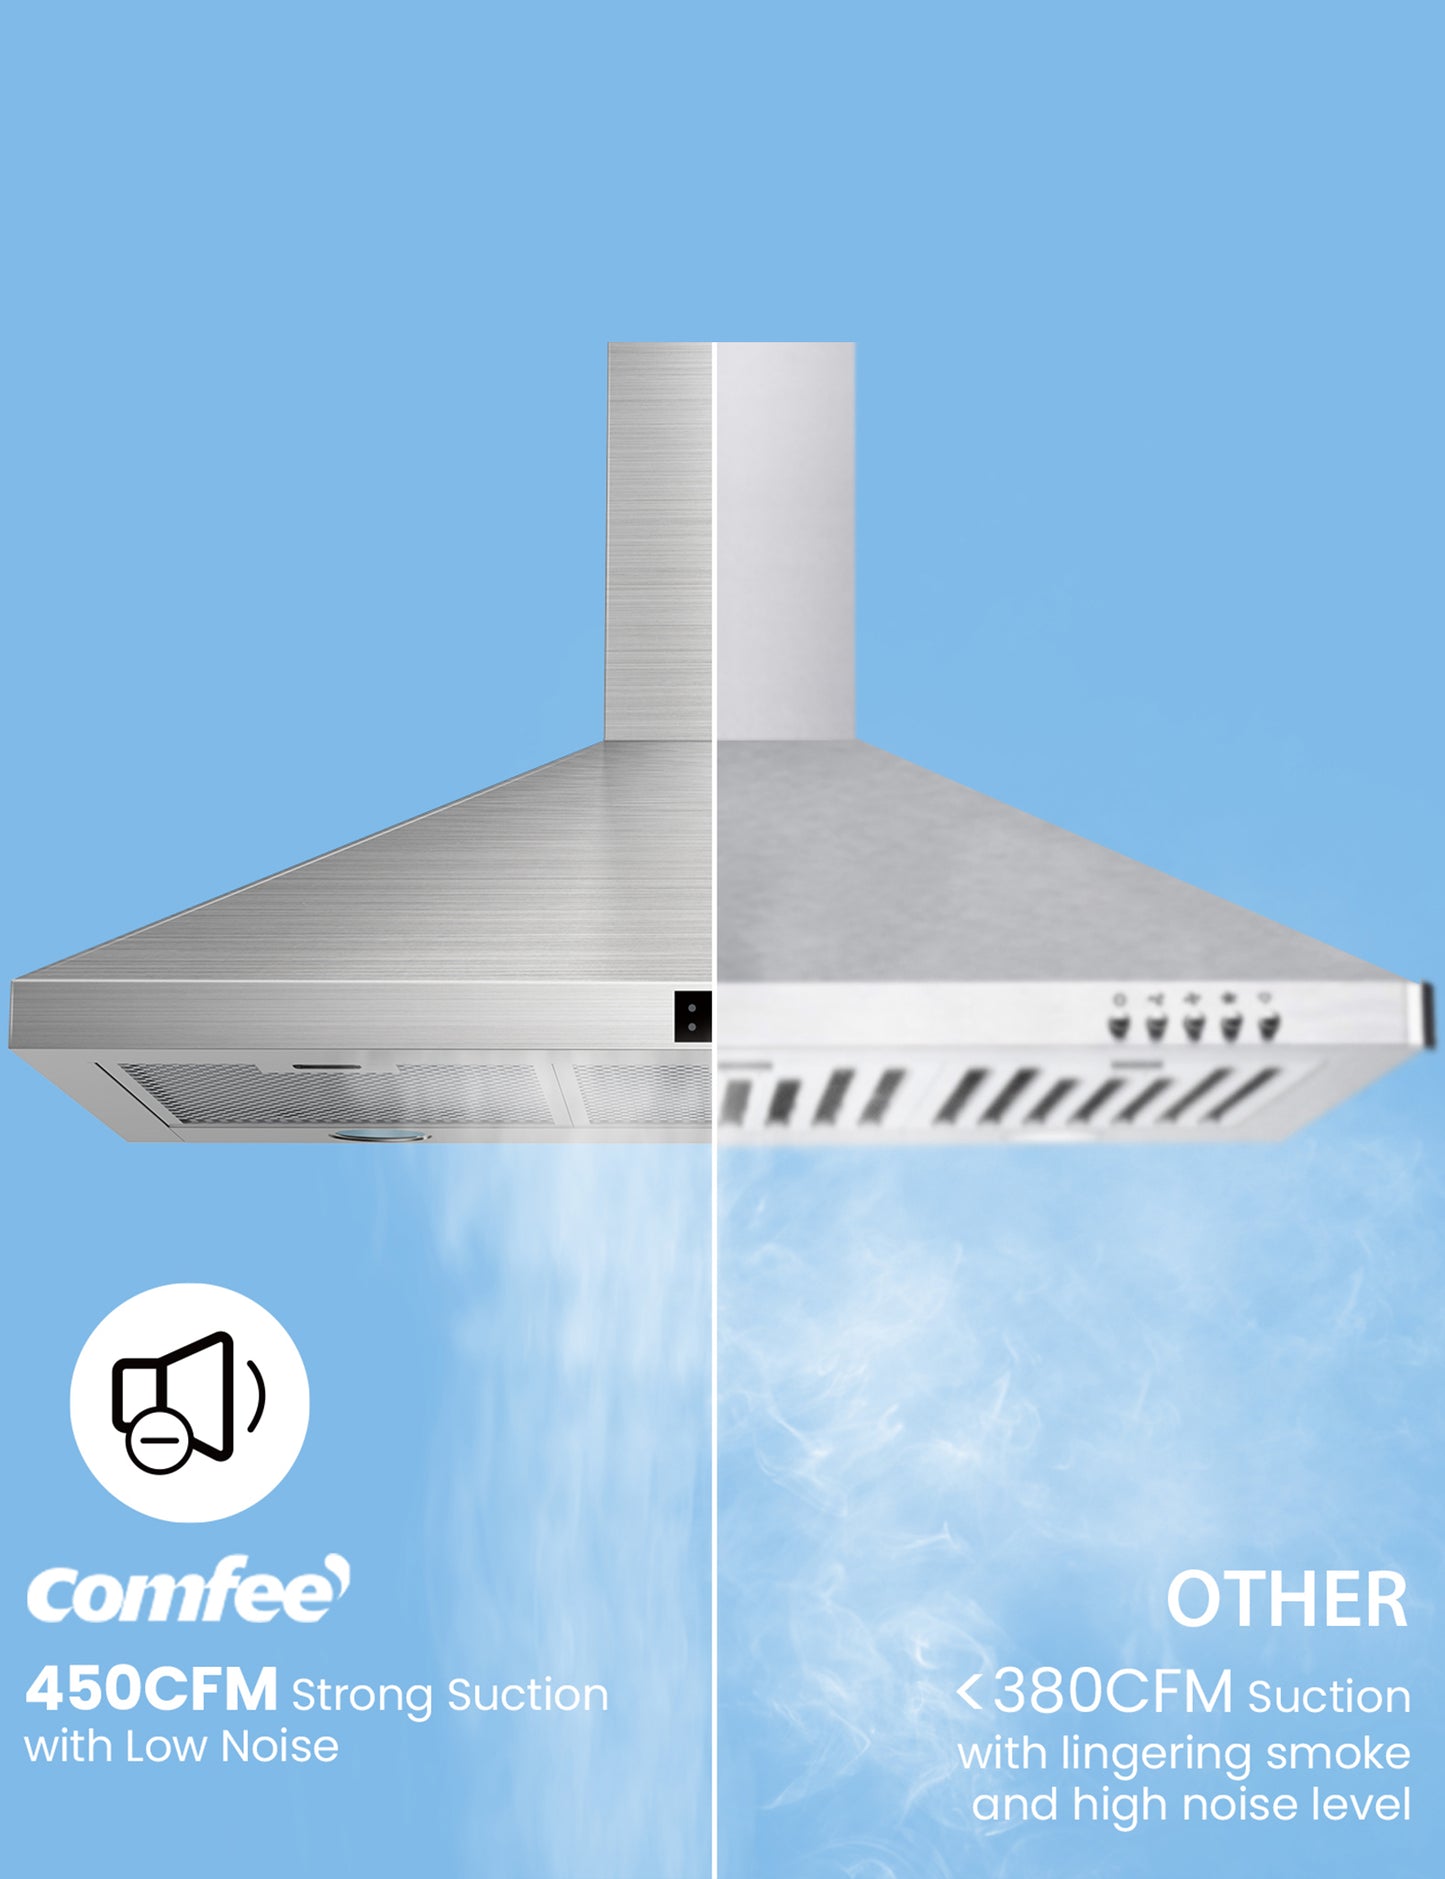 range hood with 3–speed exhaust fan provides up to 450CFM air suction